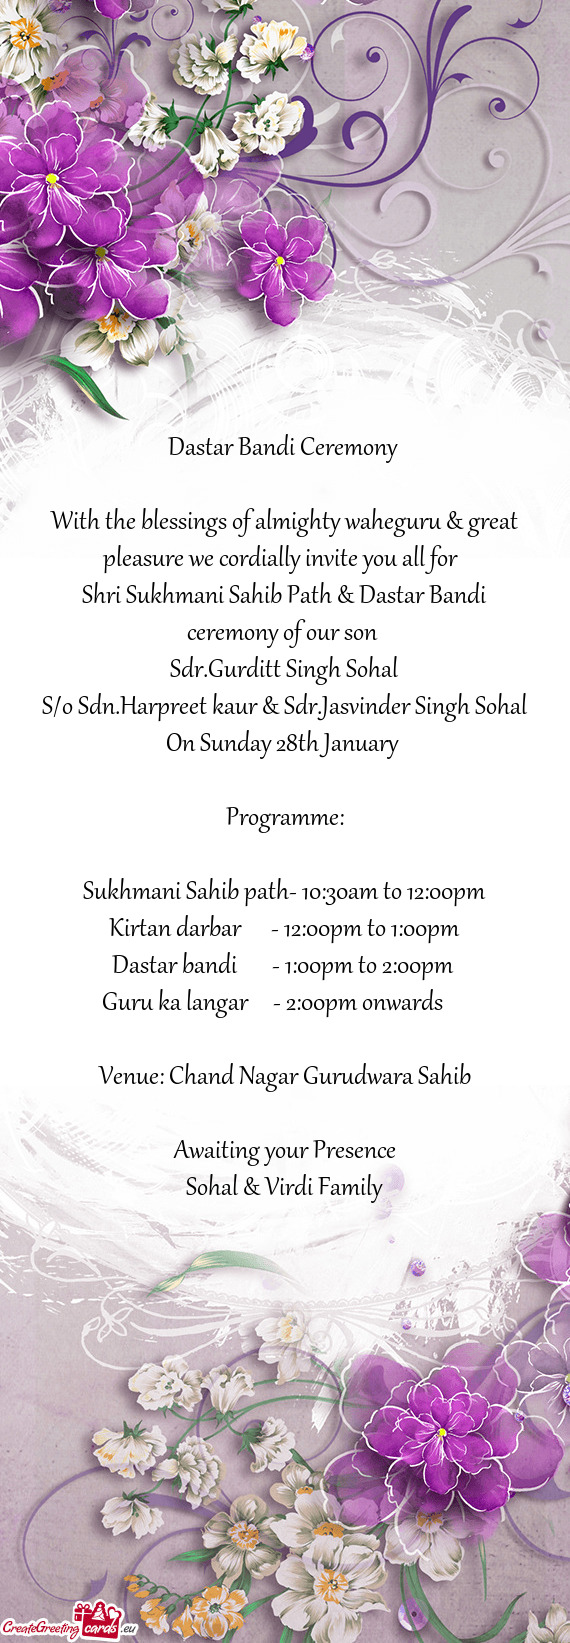 With the blessings of almighty waheguru & great pleasure we cordially invite you all for